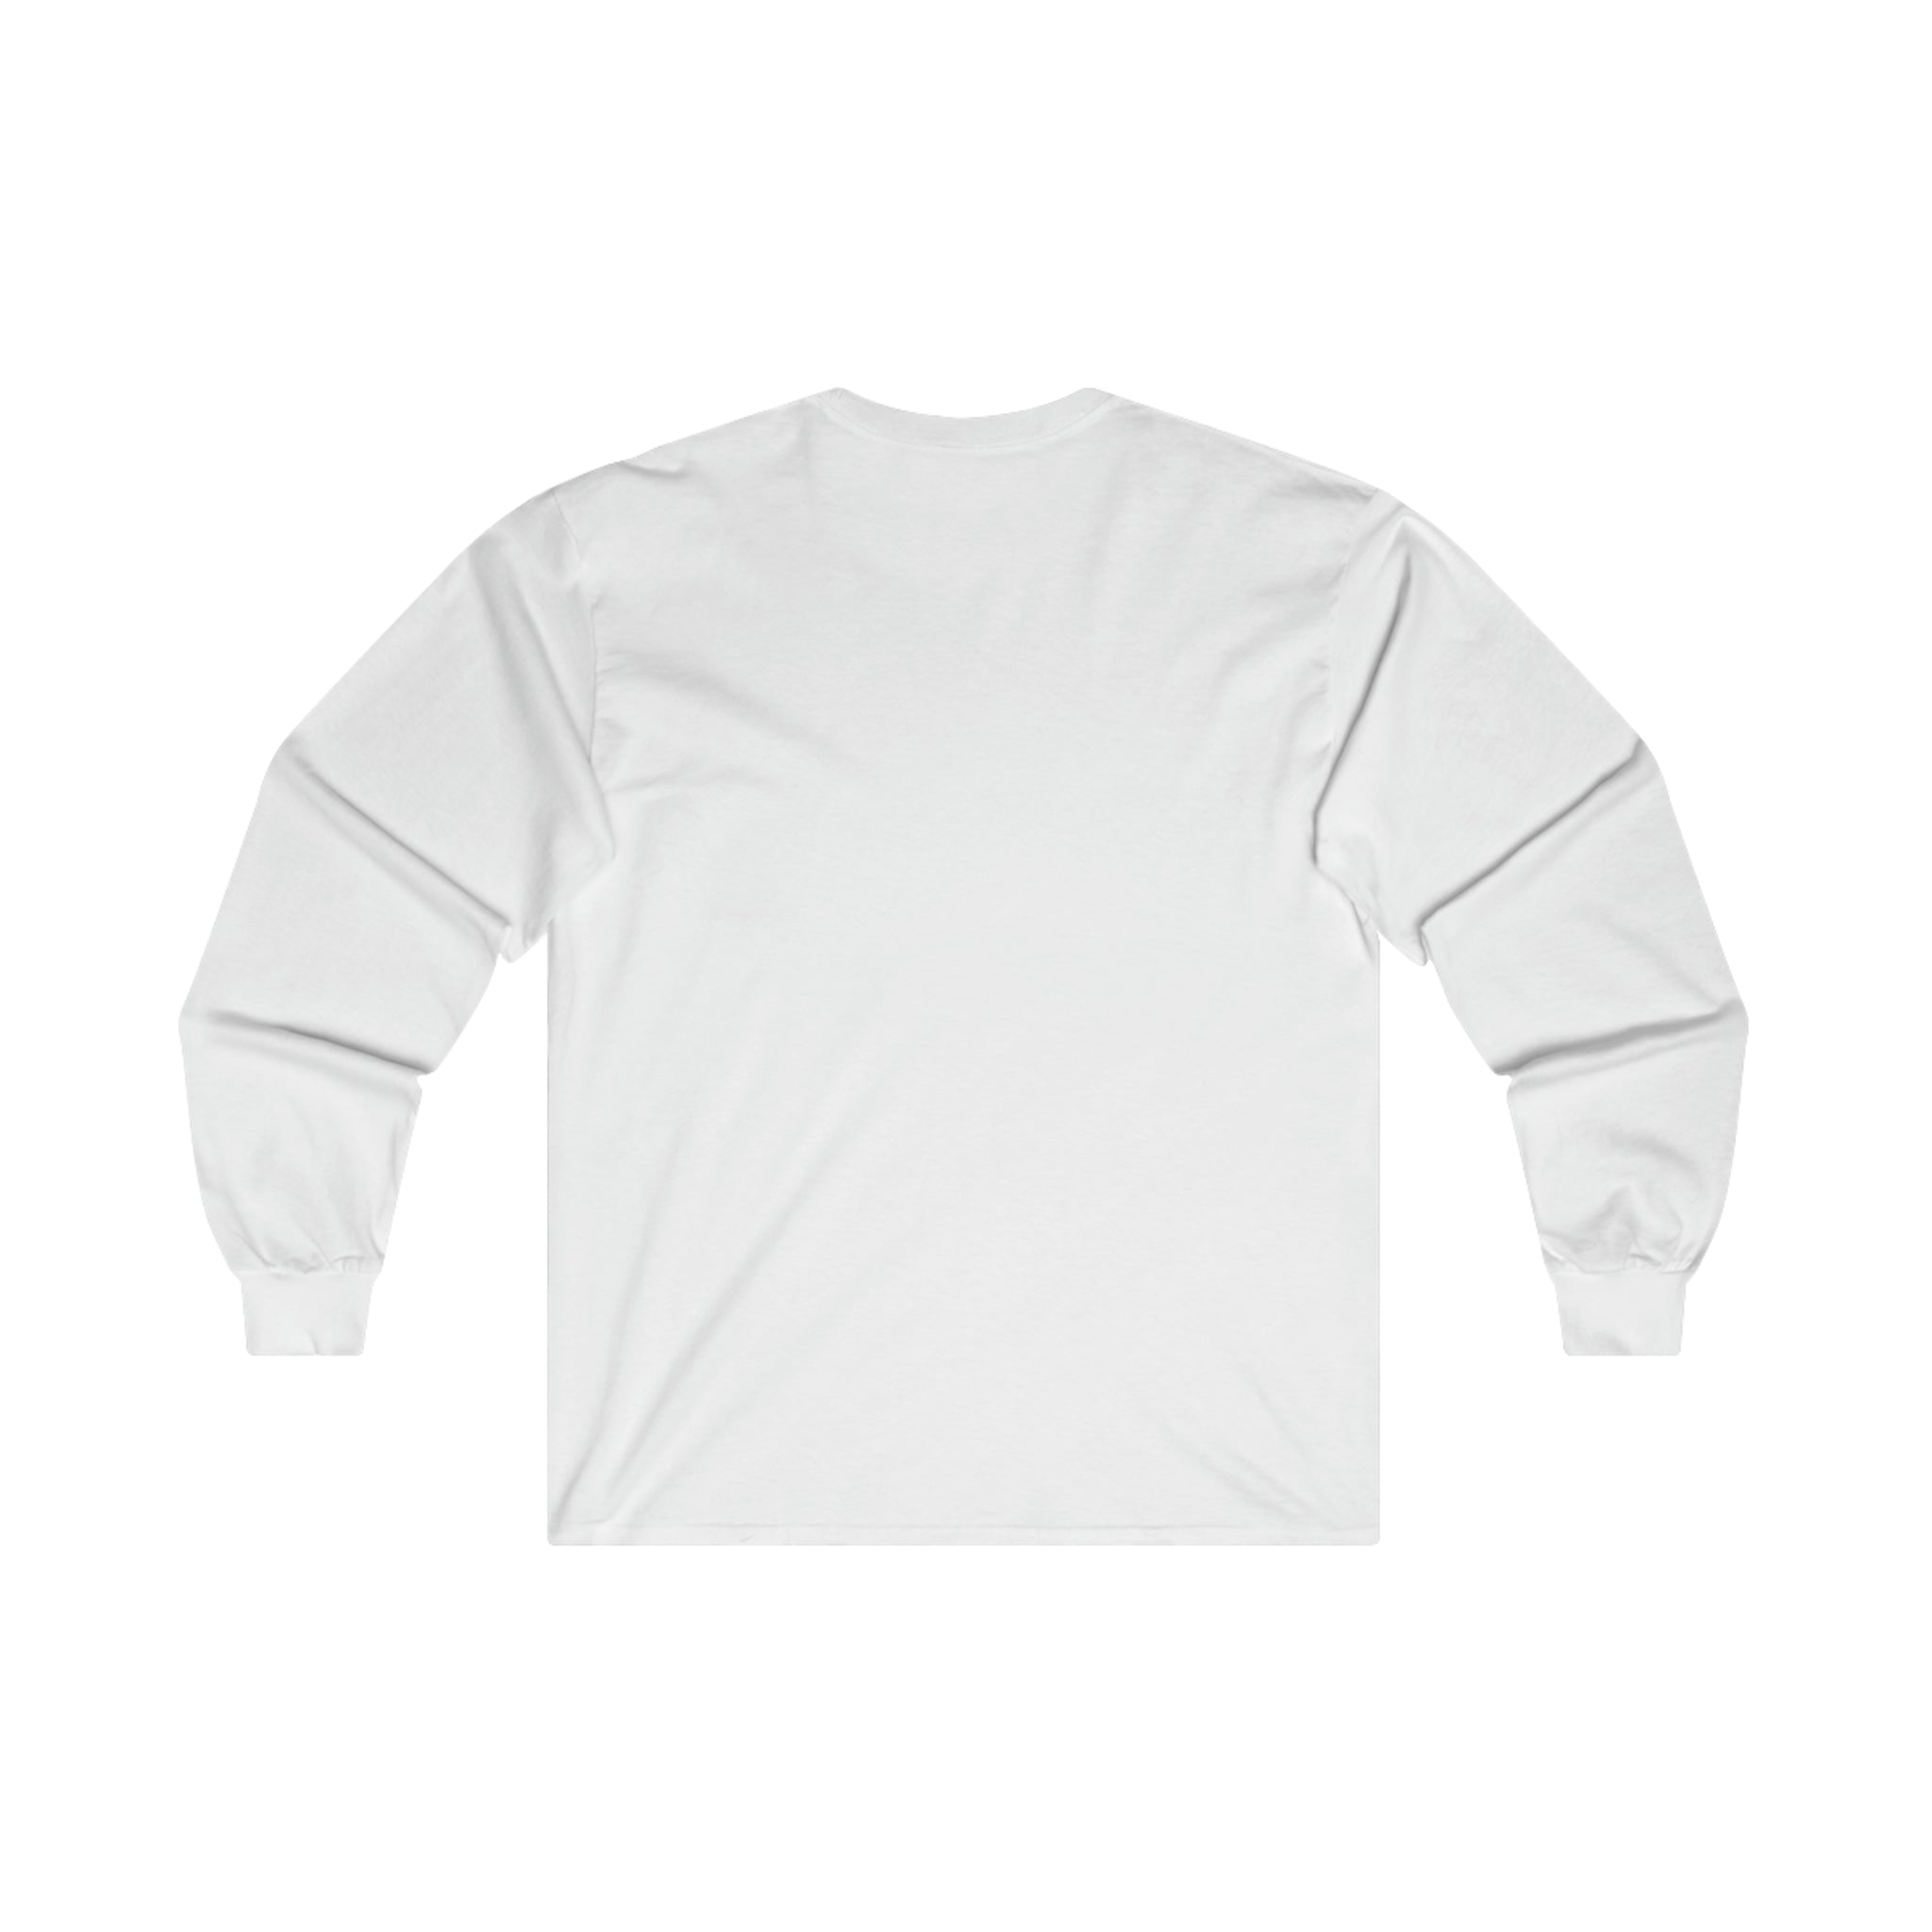 Do not under any circumstances give me a cigarette - Ultra Cotton Long Sleeve Tee